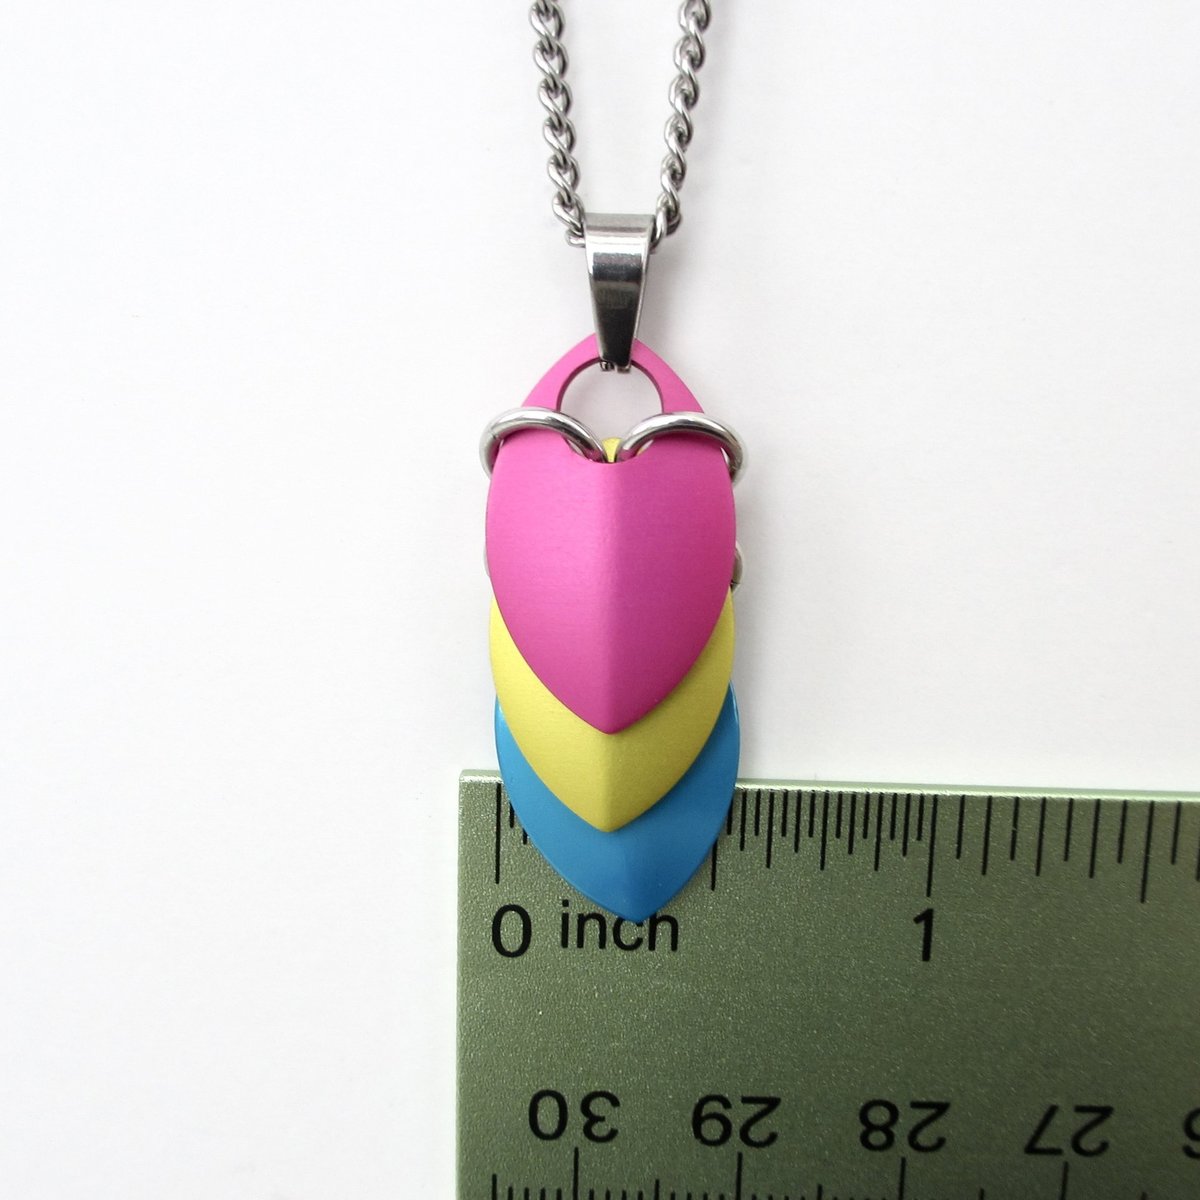 Pansexual pride pendant necklace, chainmail scale pendant, pan pride jewelry, pink yellow blue